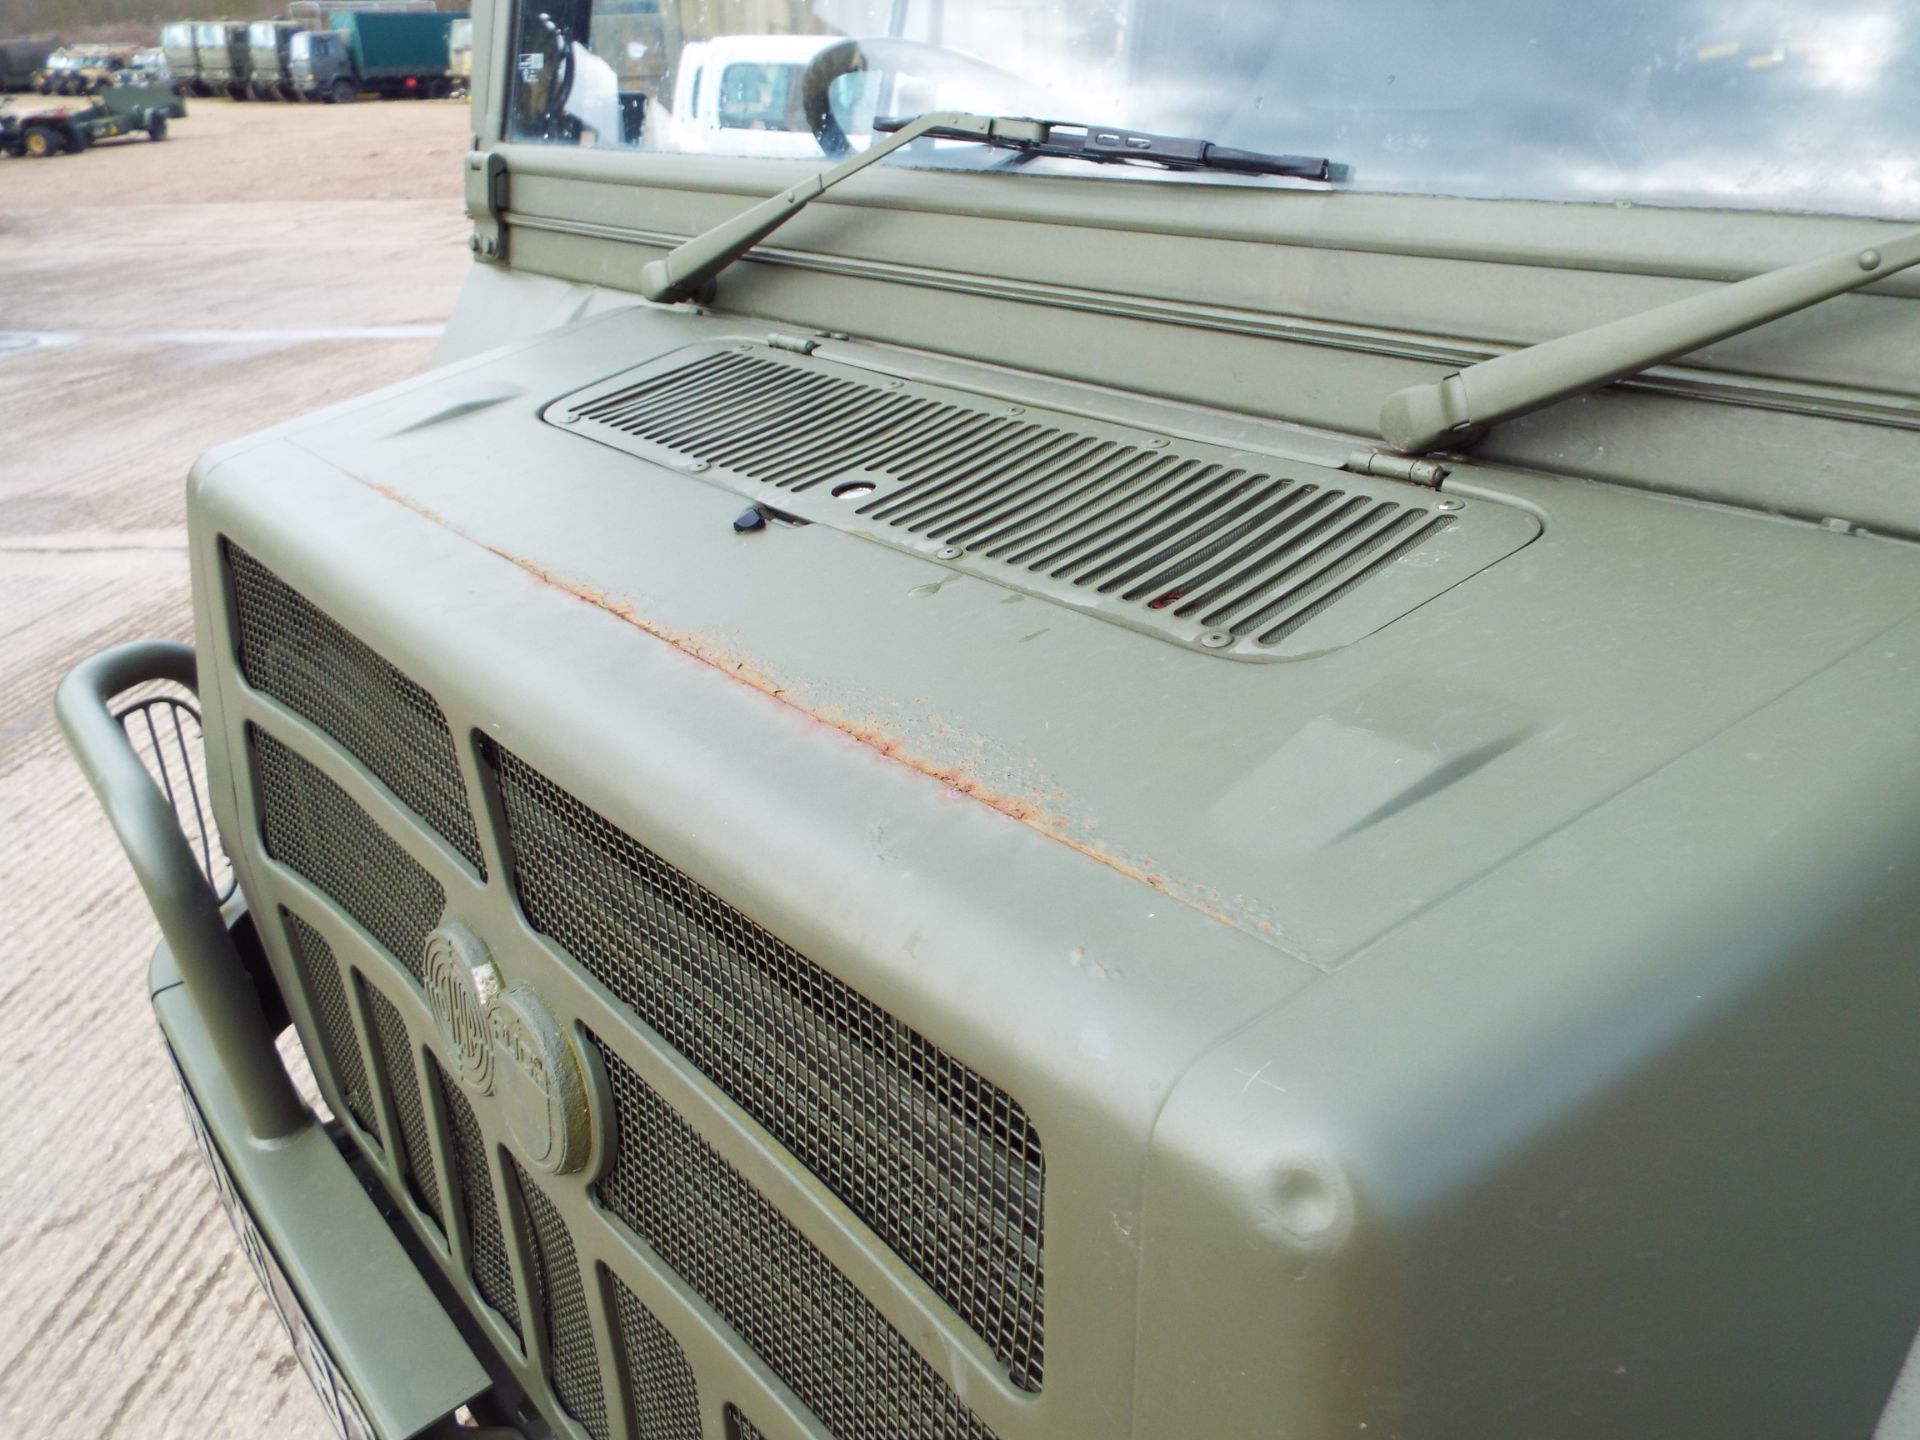 Military Specification Pinzgauer 4X4 Soft Top - Image 20 of 25